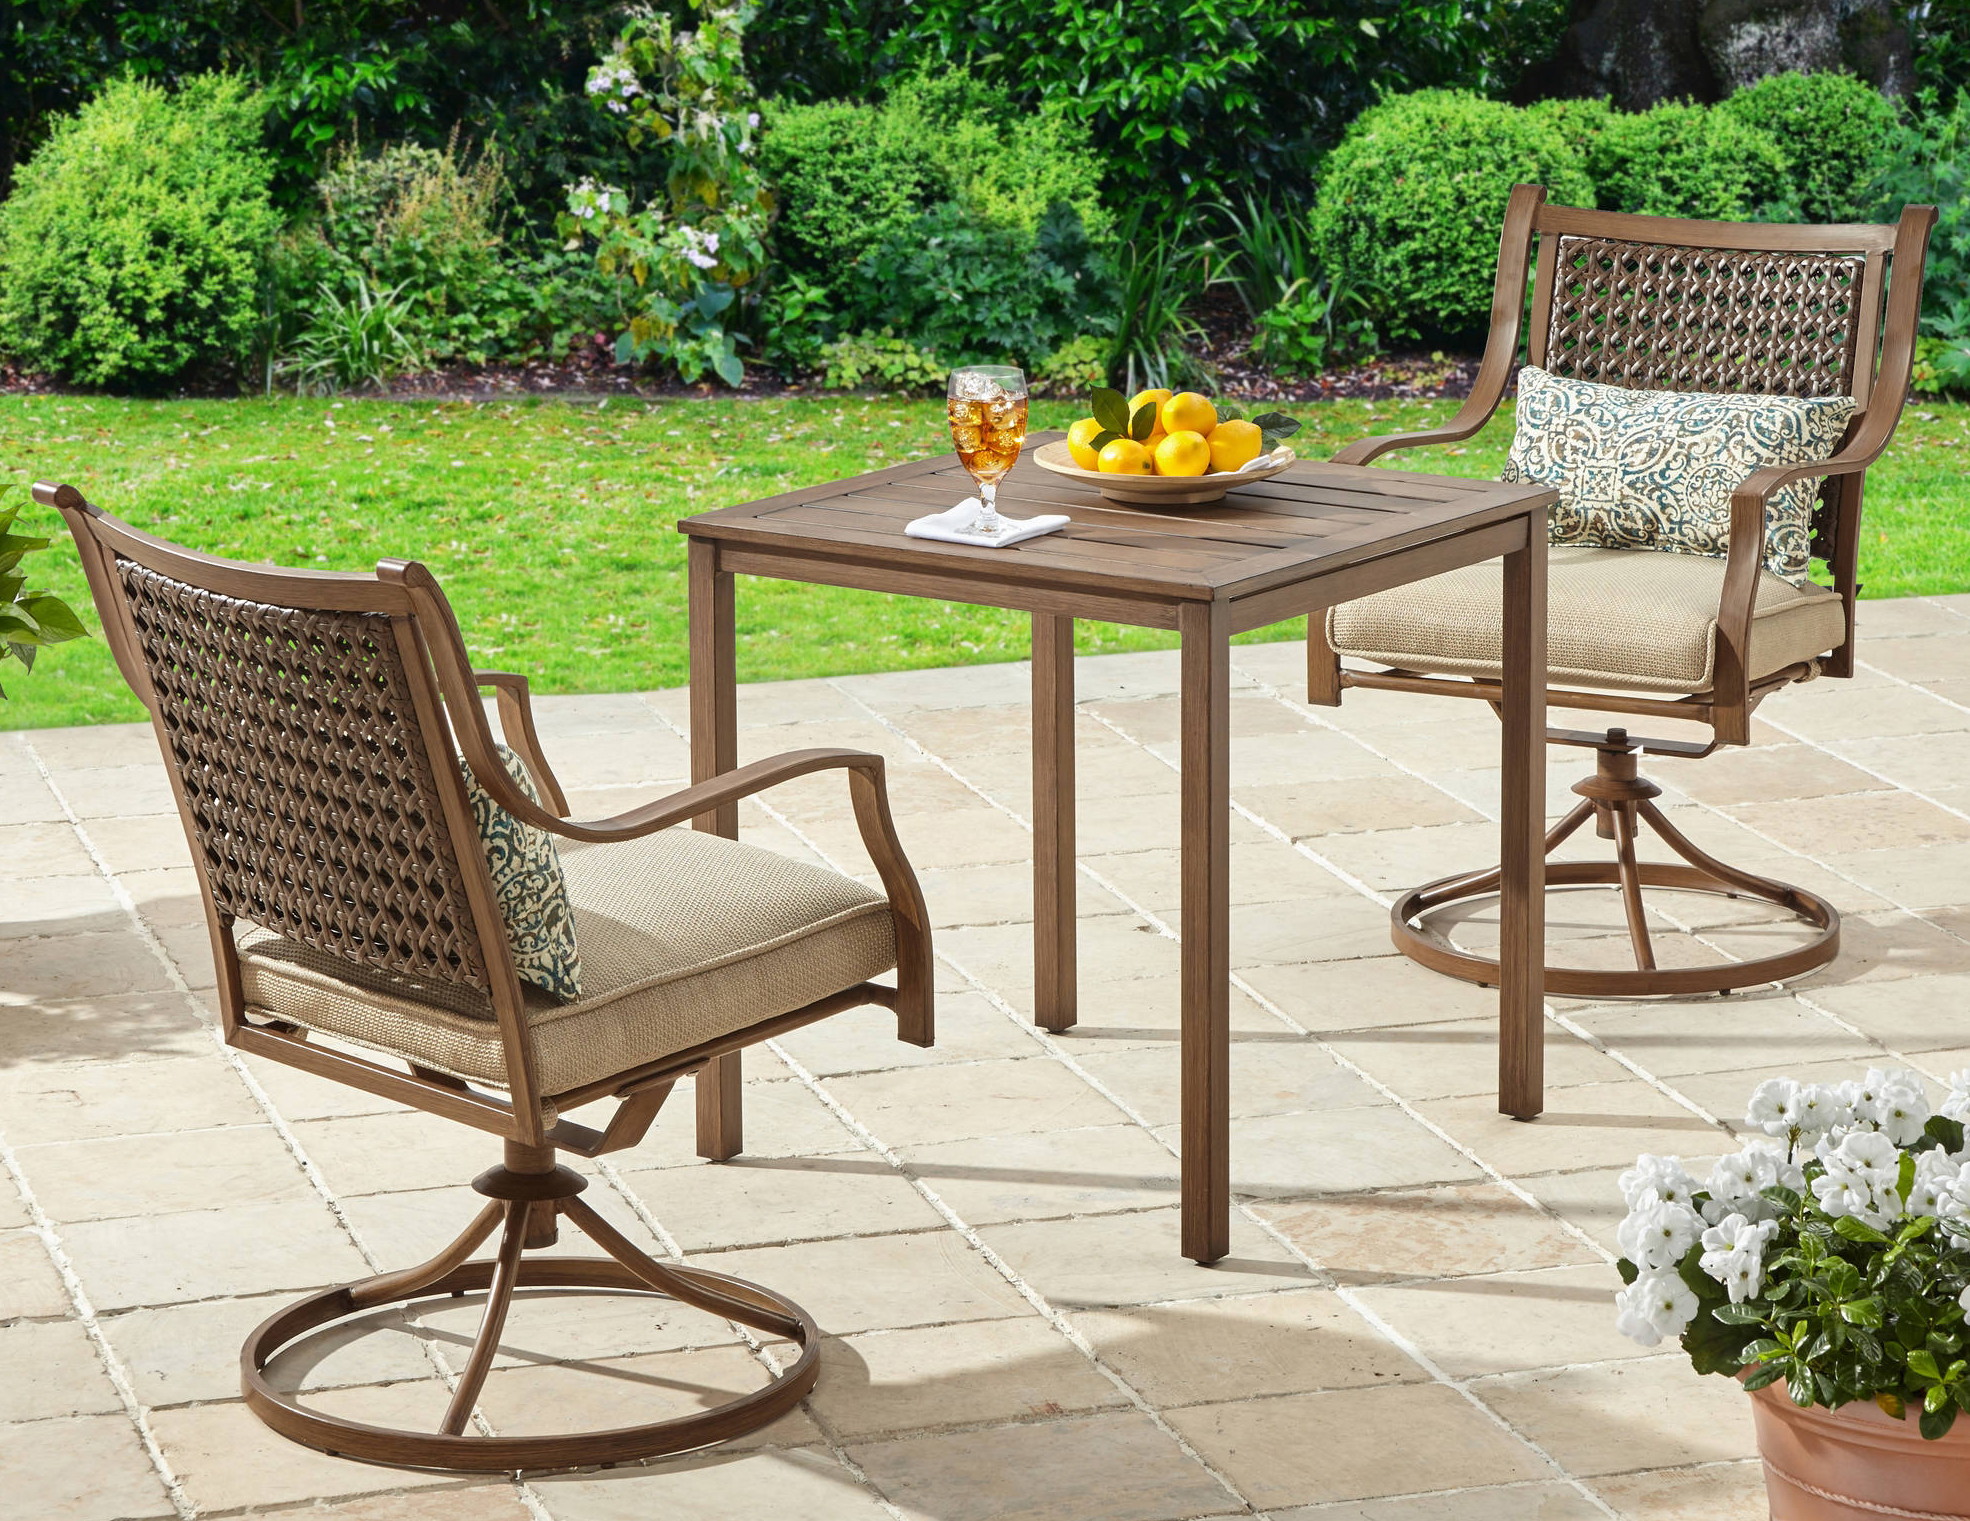 Outdoor Furniture Clearance Patio Sets As Low As 49